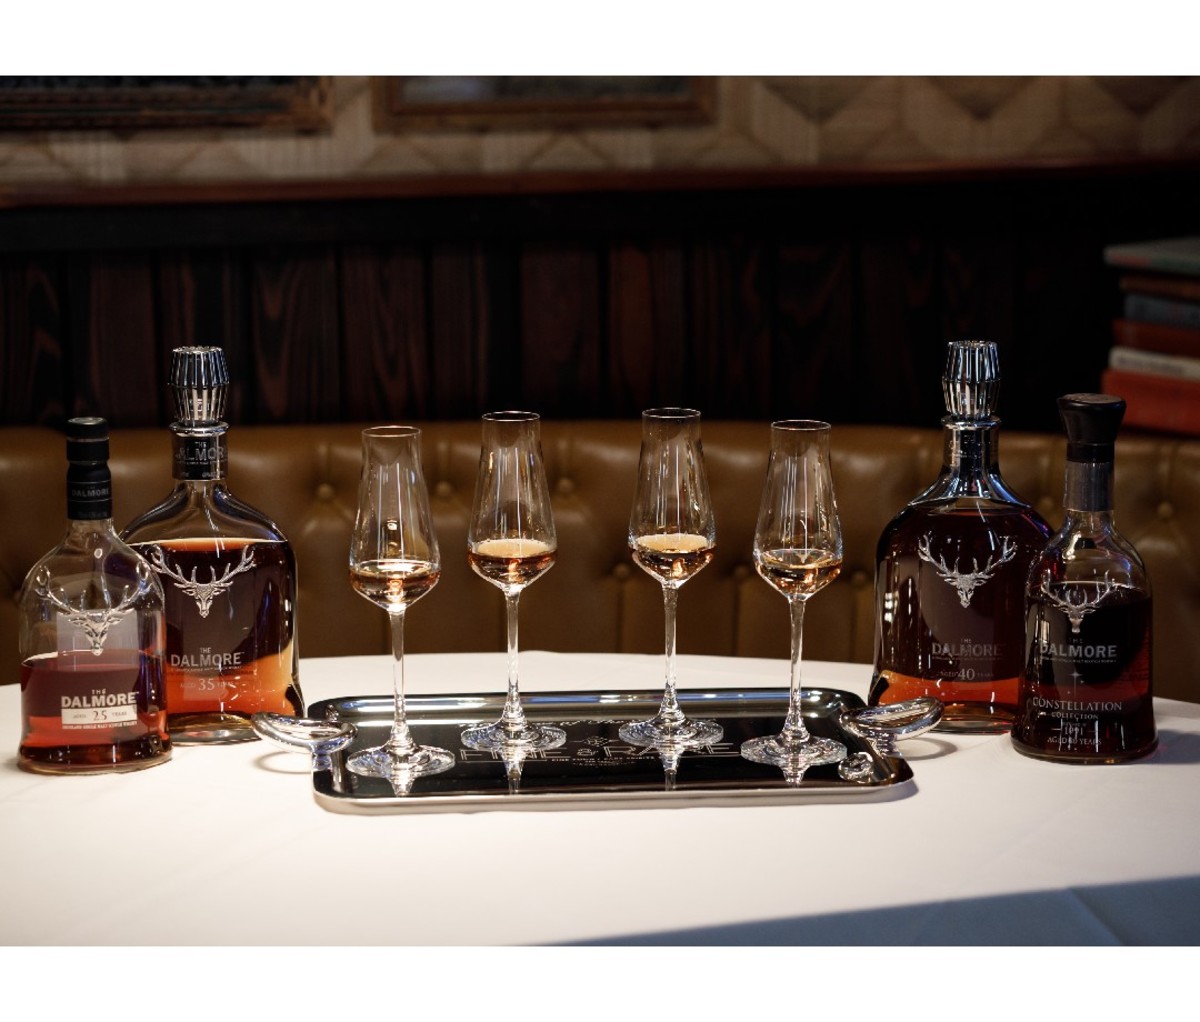 "120 Years of The Dalmore"